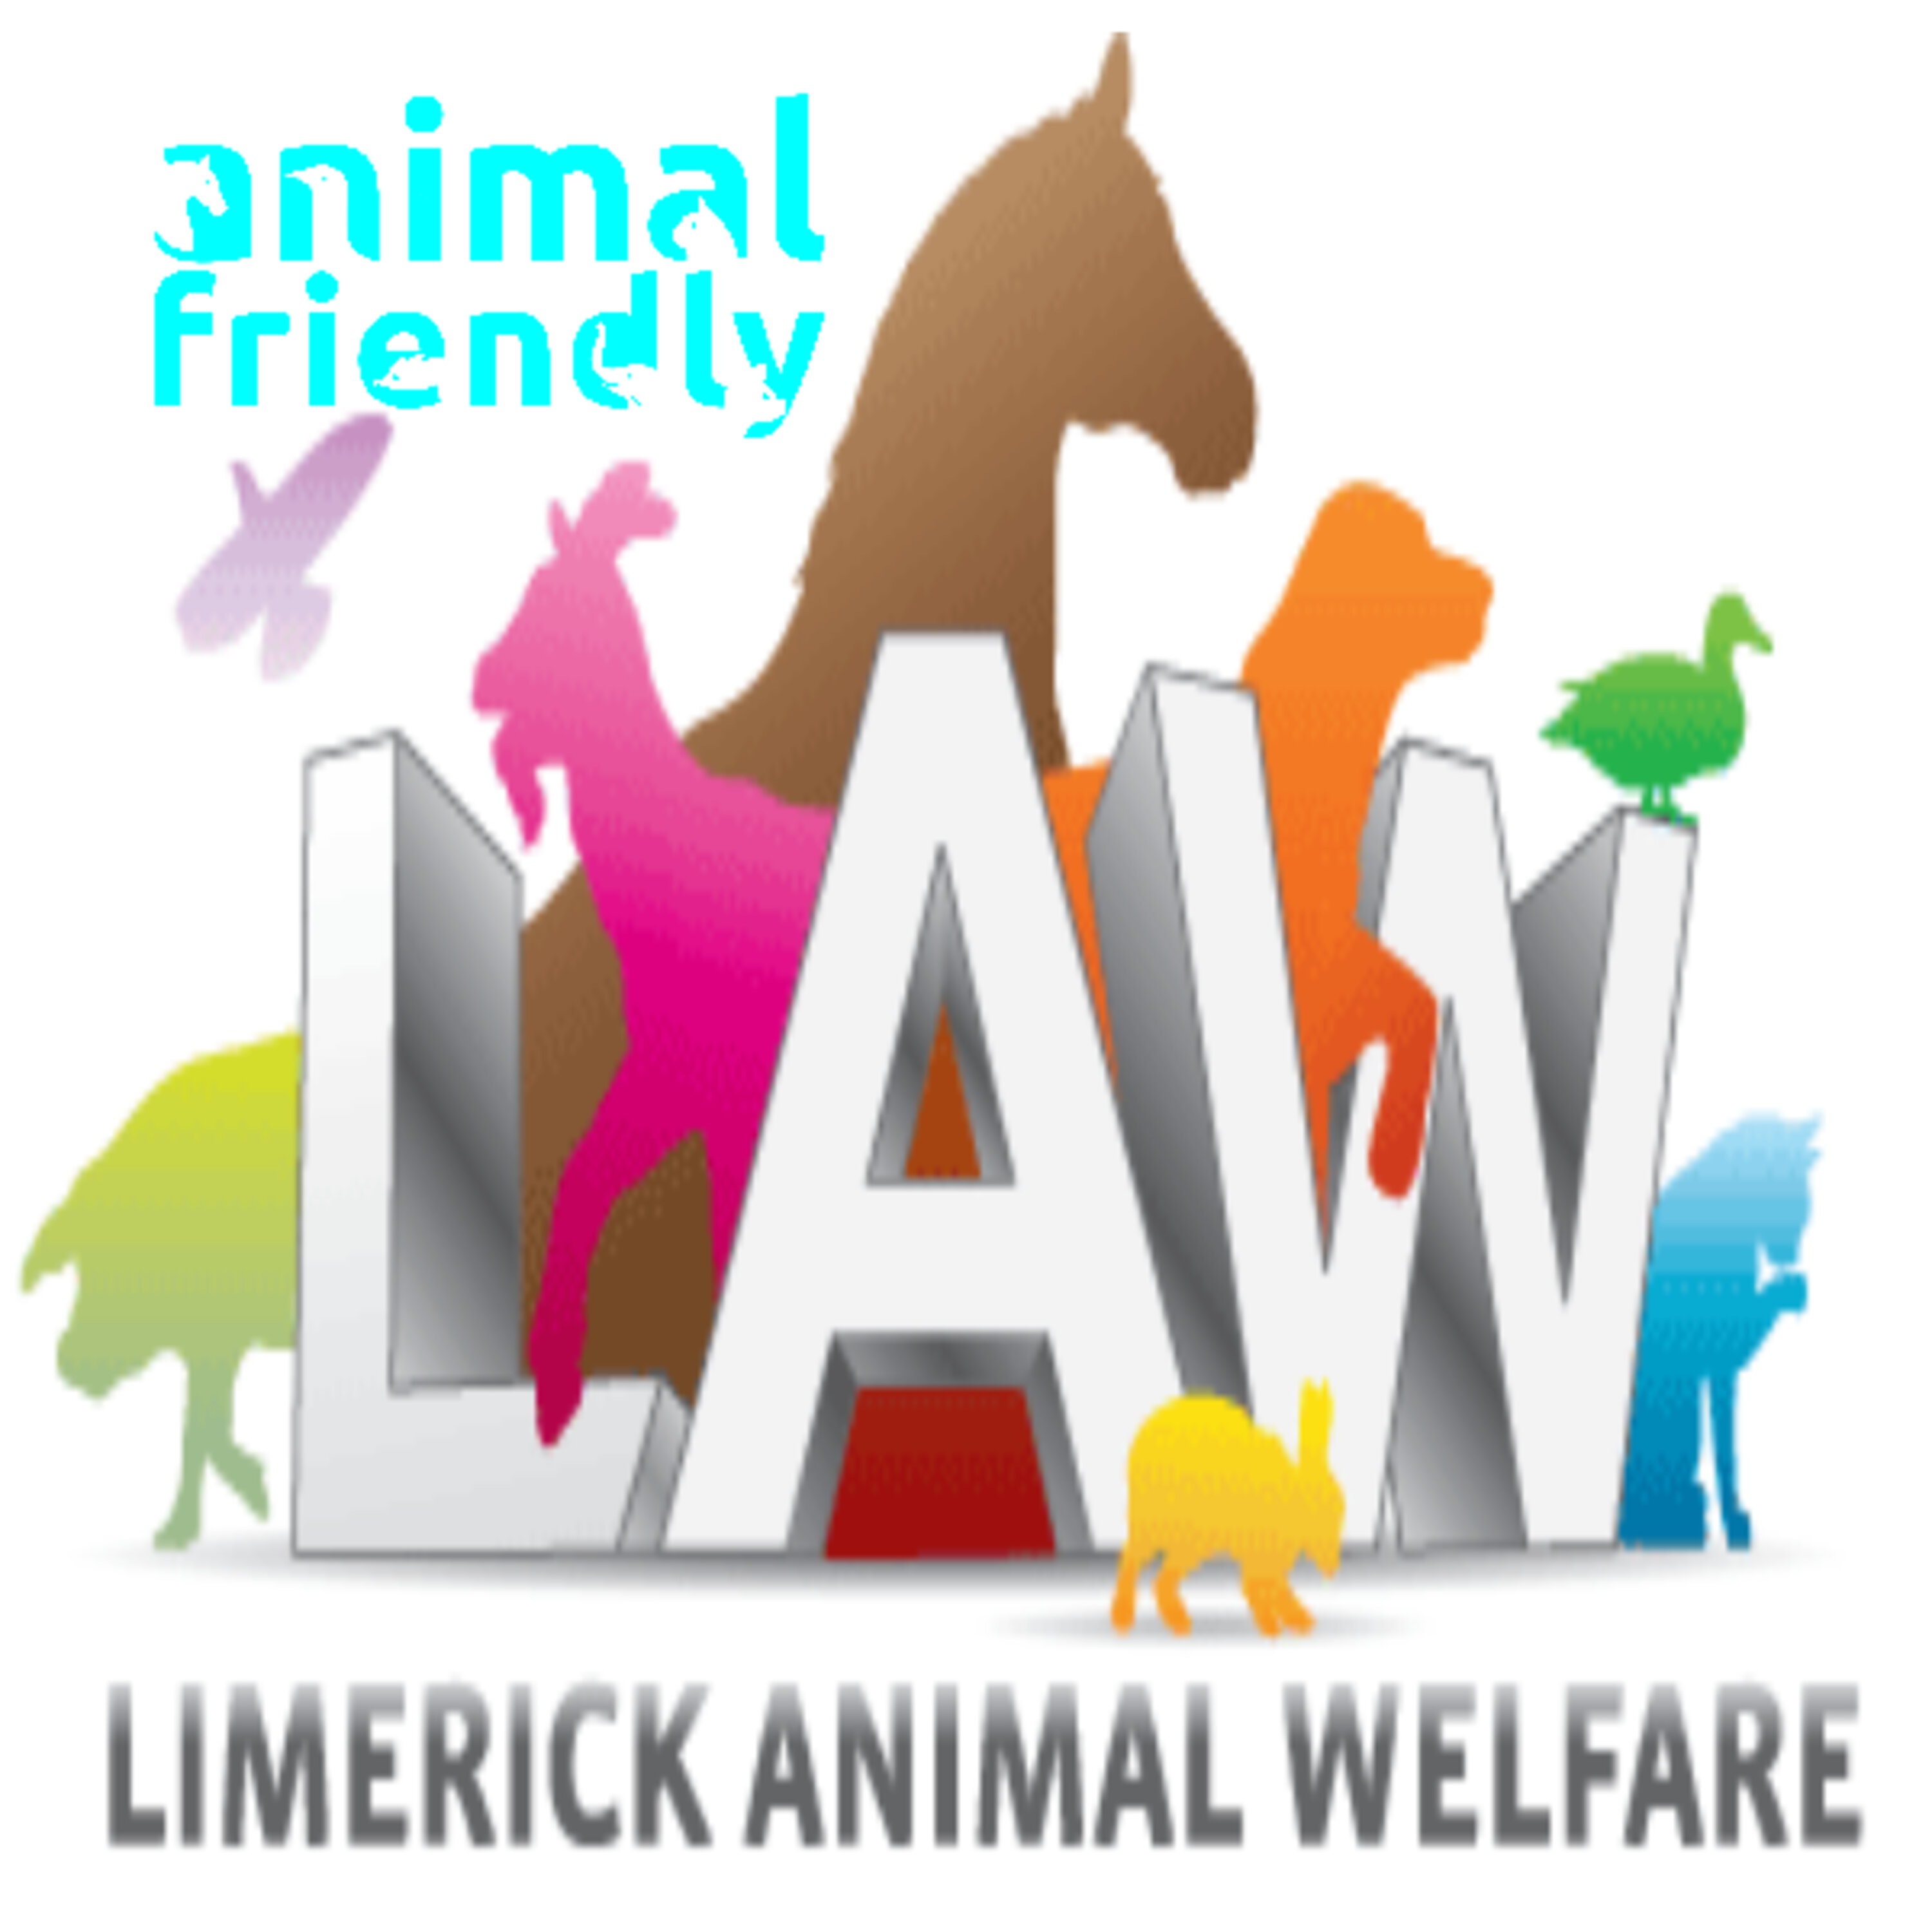 6. A great day out at Limerick Animal Welfare Image